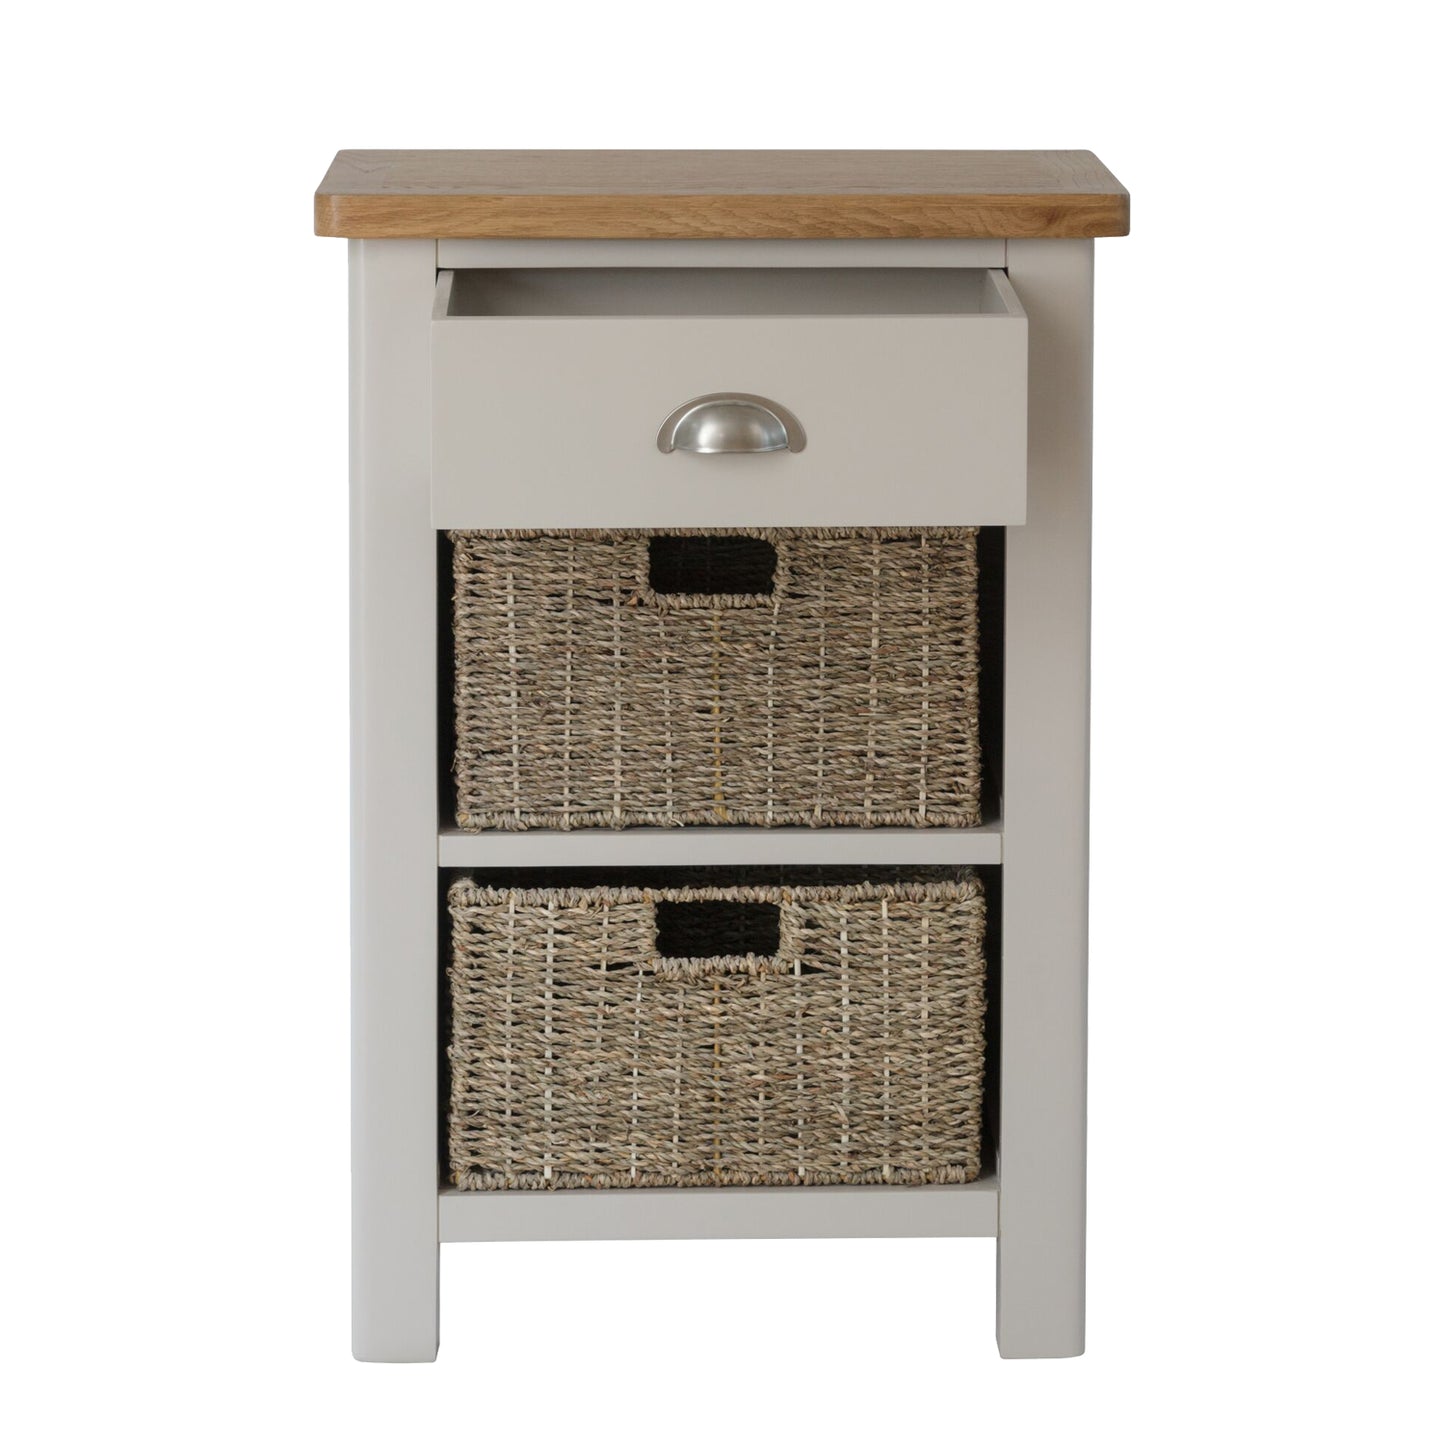 Pershore Painted Side Table - 1 Drawer with 2 Baskets